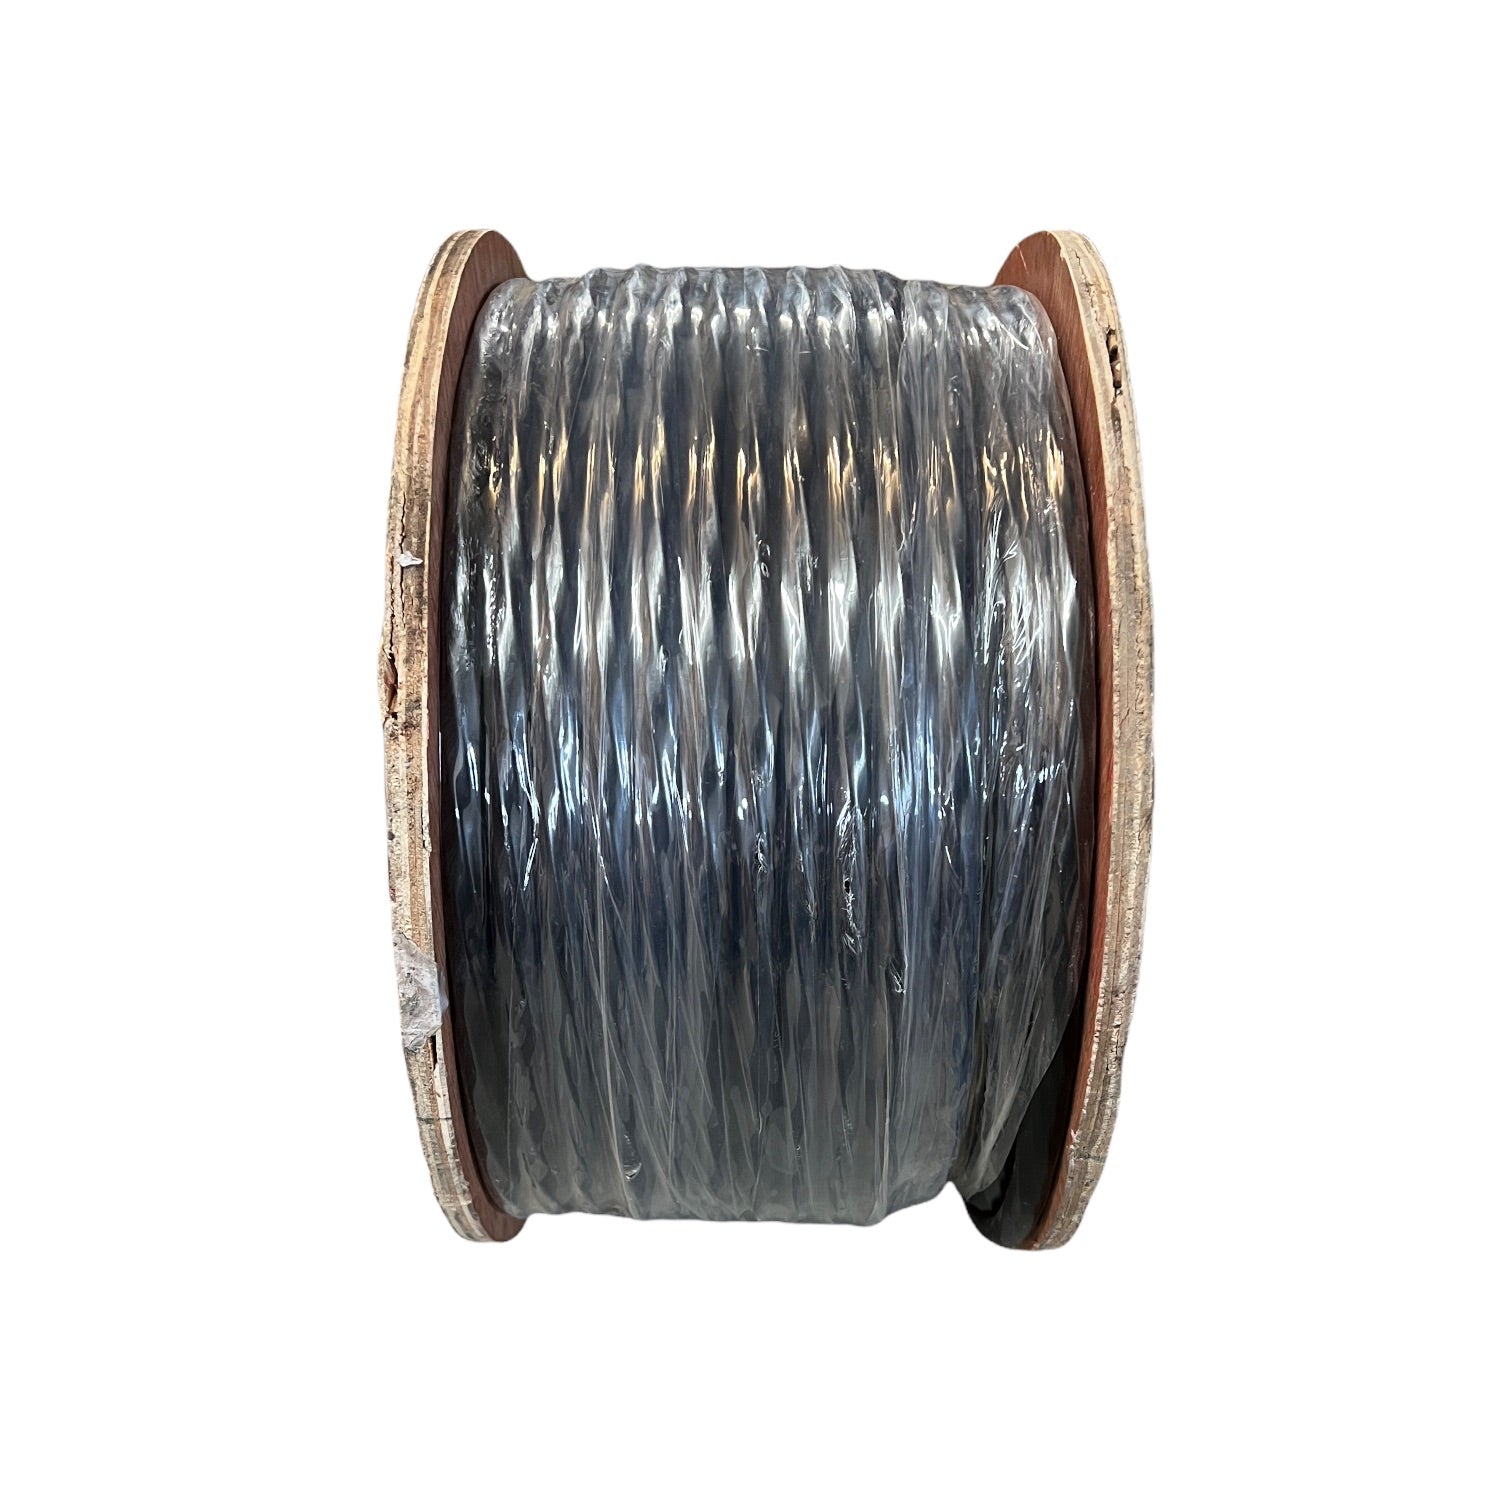 18/8X500 - Multi-Conductor Irrigation Control Wire, 18 awg, 18/8 X 500 ft